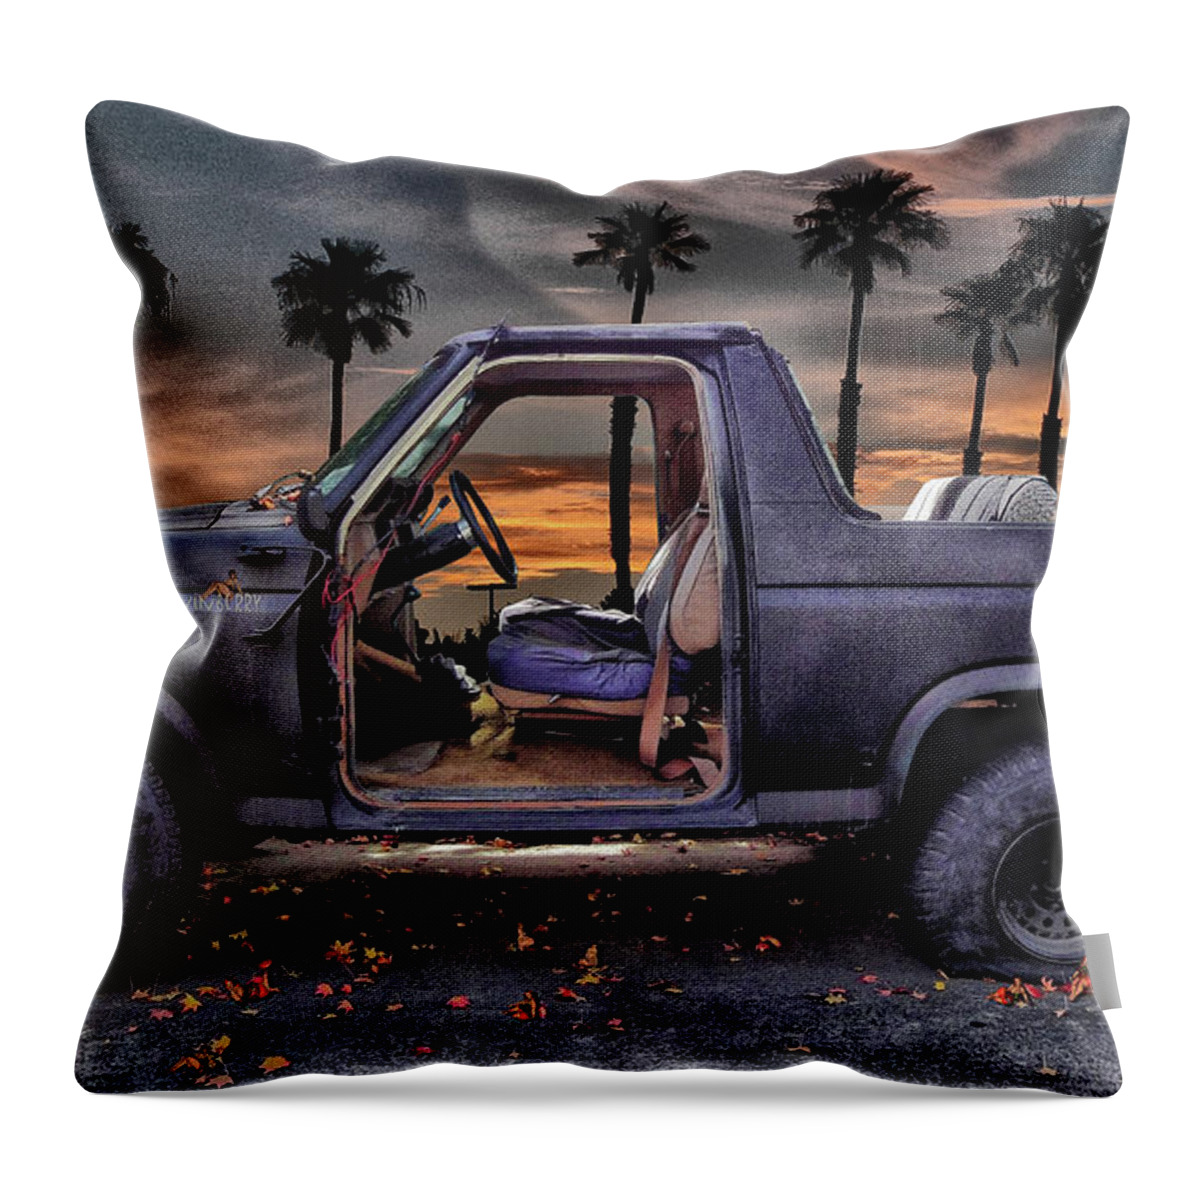 Ford Throw Pillow featuring the digital art What Dreams Are Made Of by Bob Winberry